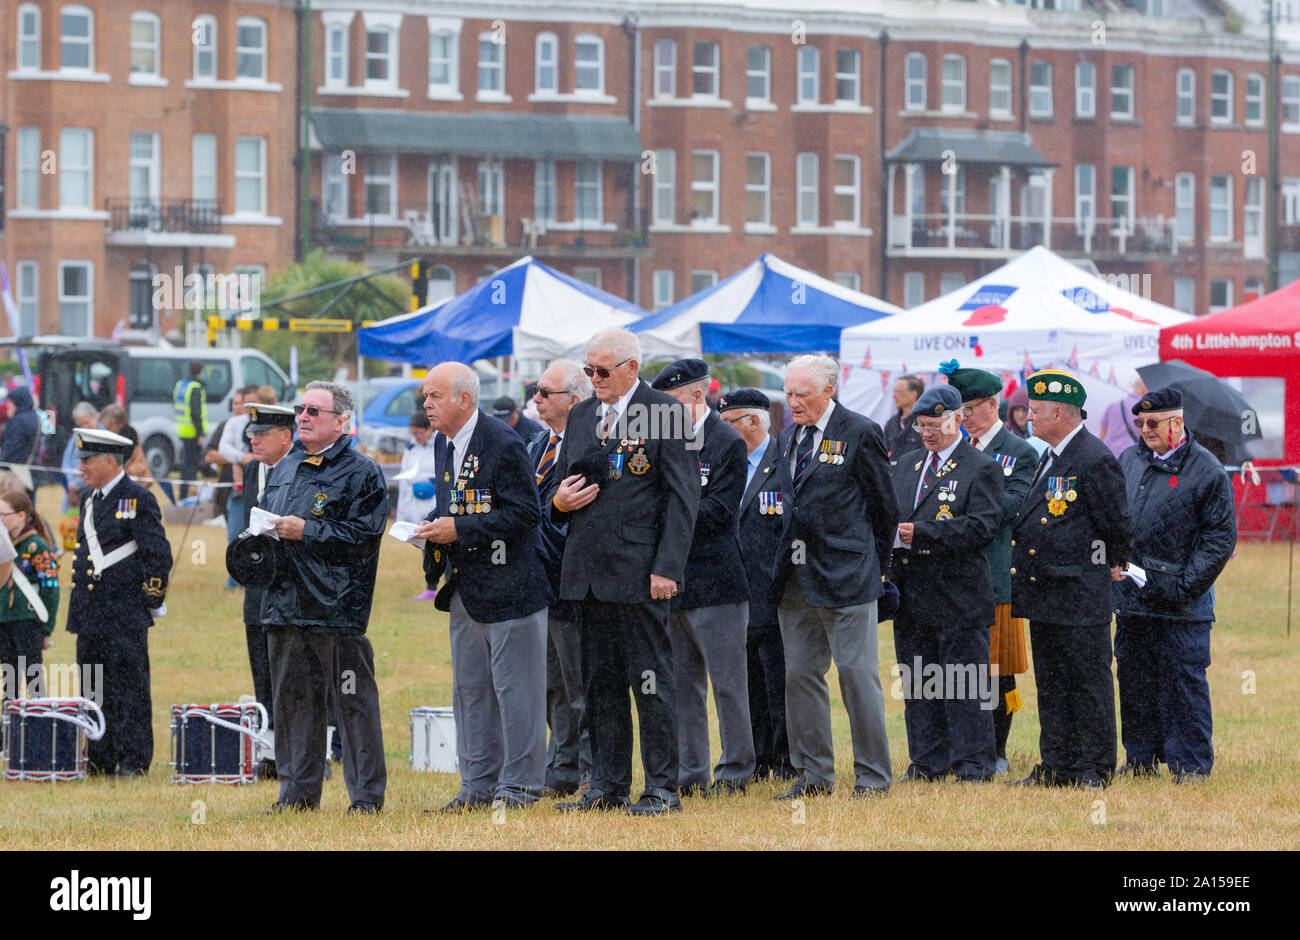 Veteran military men standing in the rain at the morning service at the June 2017 Armed Forces Day event in Littlehampton, West Sussex, UK. Stock Photo